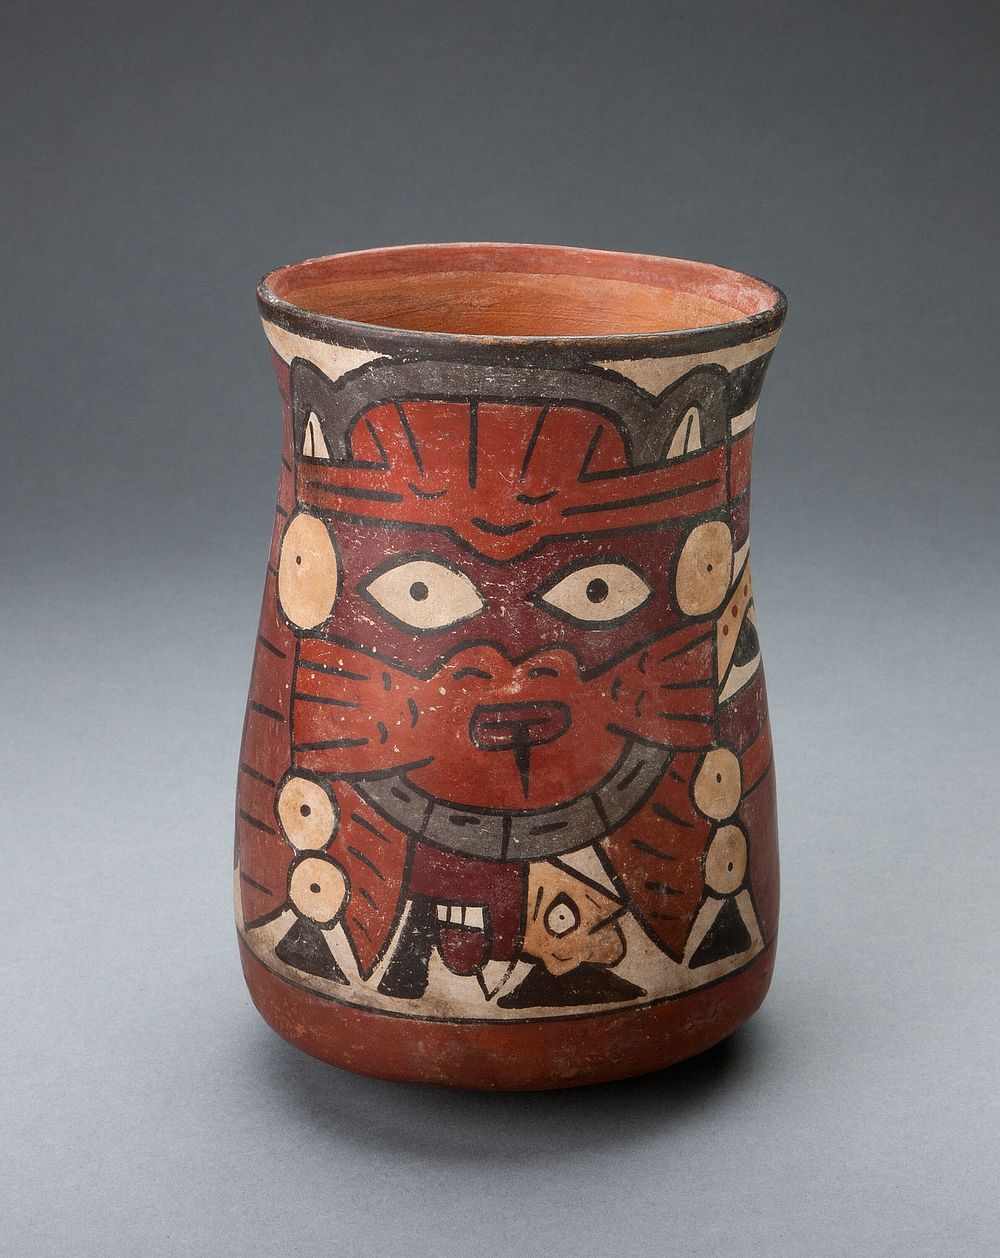 Beaker Depicting a Costumed Performer Holding Decapitated Head by Nazca